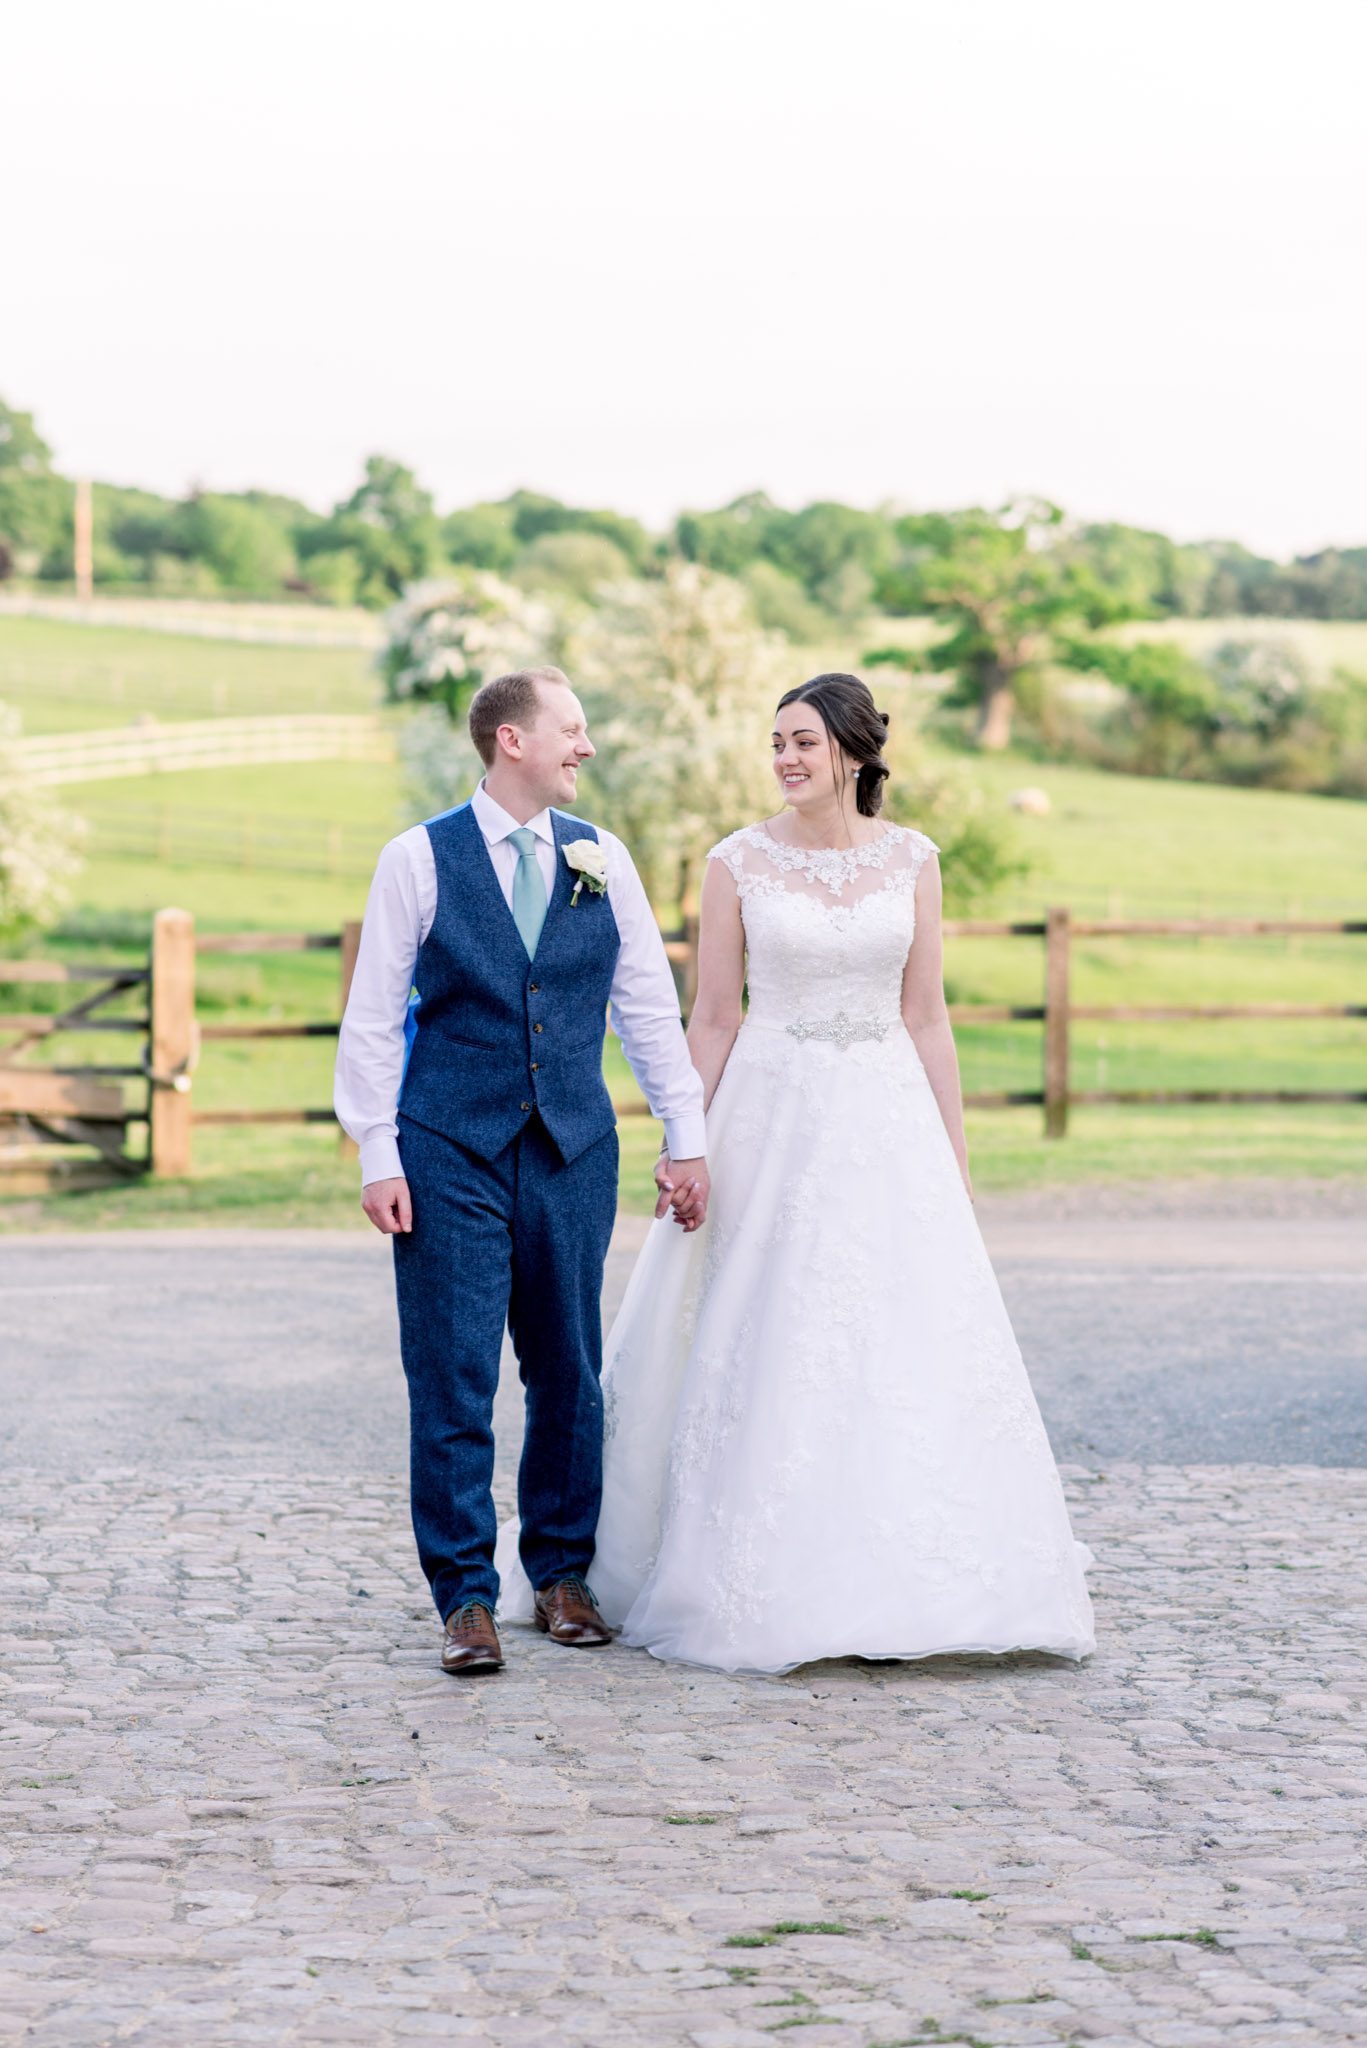 https://usercontent.one/wp/www.natalieandmax.co.uk/wp-content/uploads/2022/06/JD-Coltsfoot-Wedding-Photography-by-Natalie-and-Max-Photo-and-Films-658.jpg?media=1711985334